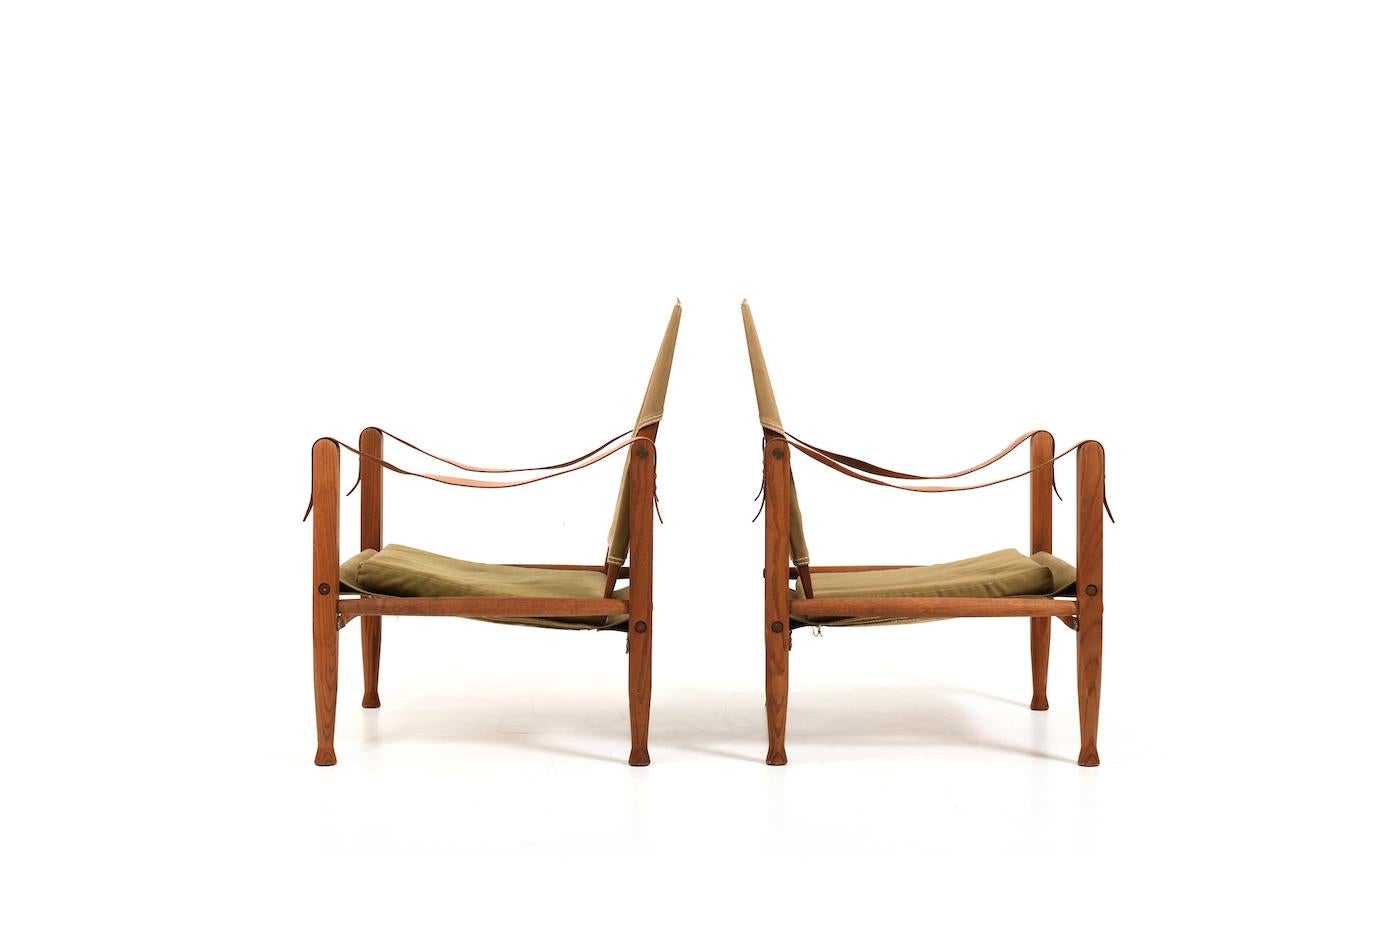 Pair of old Safari chairs by Kaare Klint for Rud. Rasmussen Denmark. Designed in 1933, prod. 1960s. Made in solid oak or ash. With original leather armrests, green linen fabric and cushions. Untouchable condition, with nice patina. Set price. The